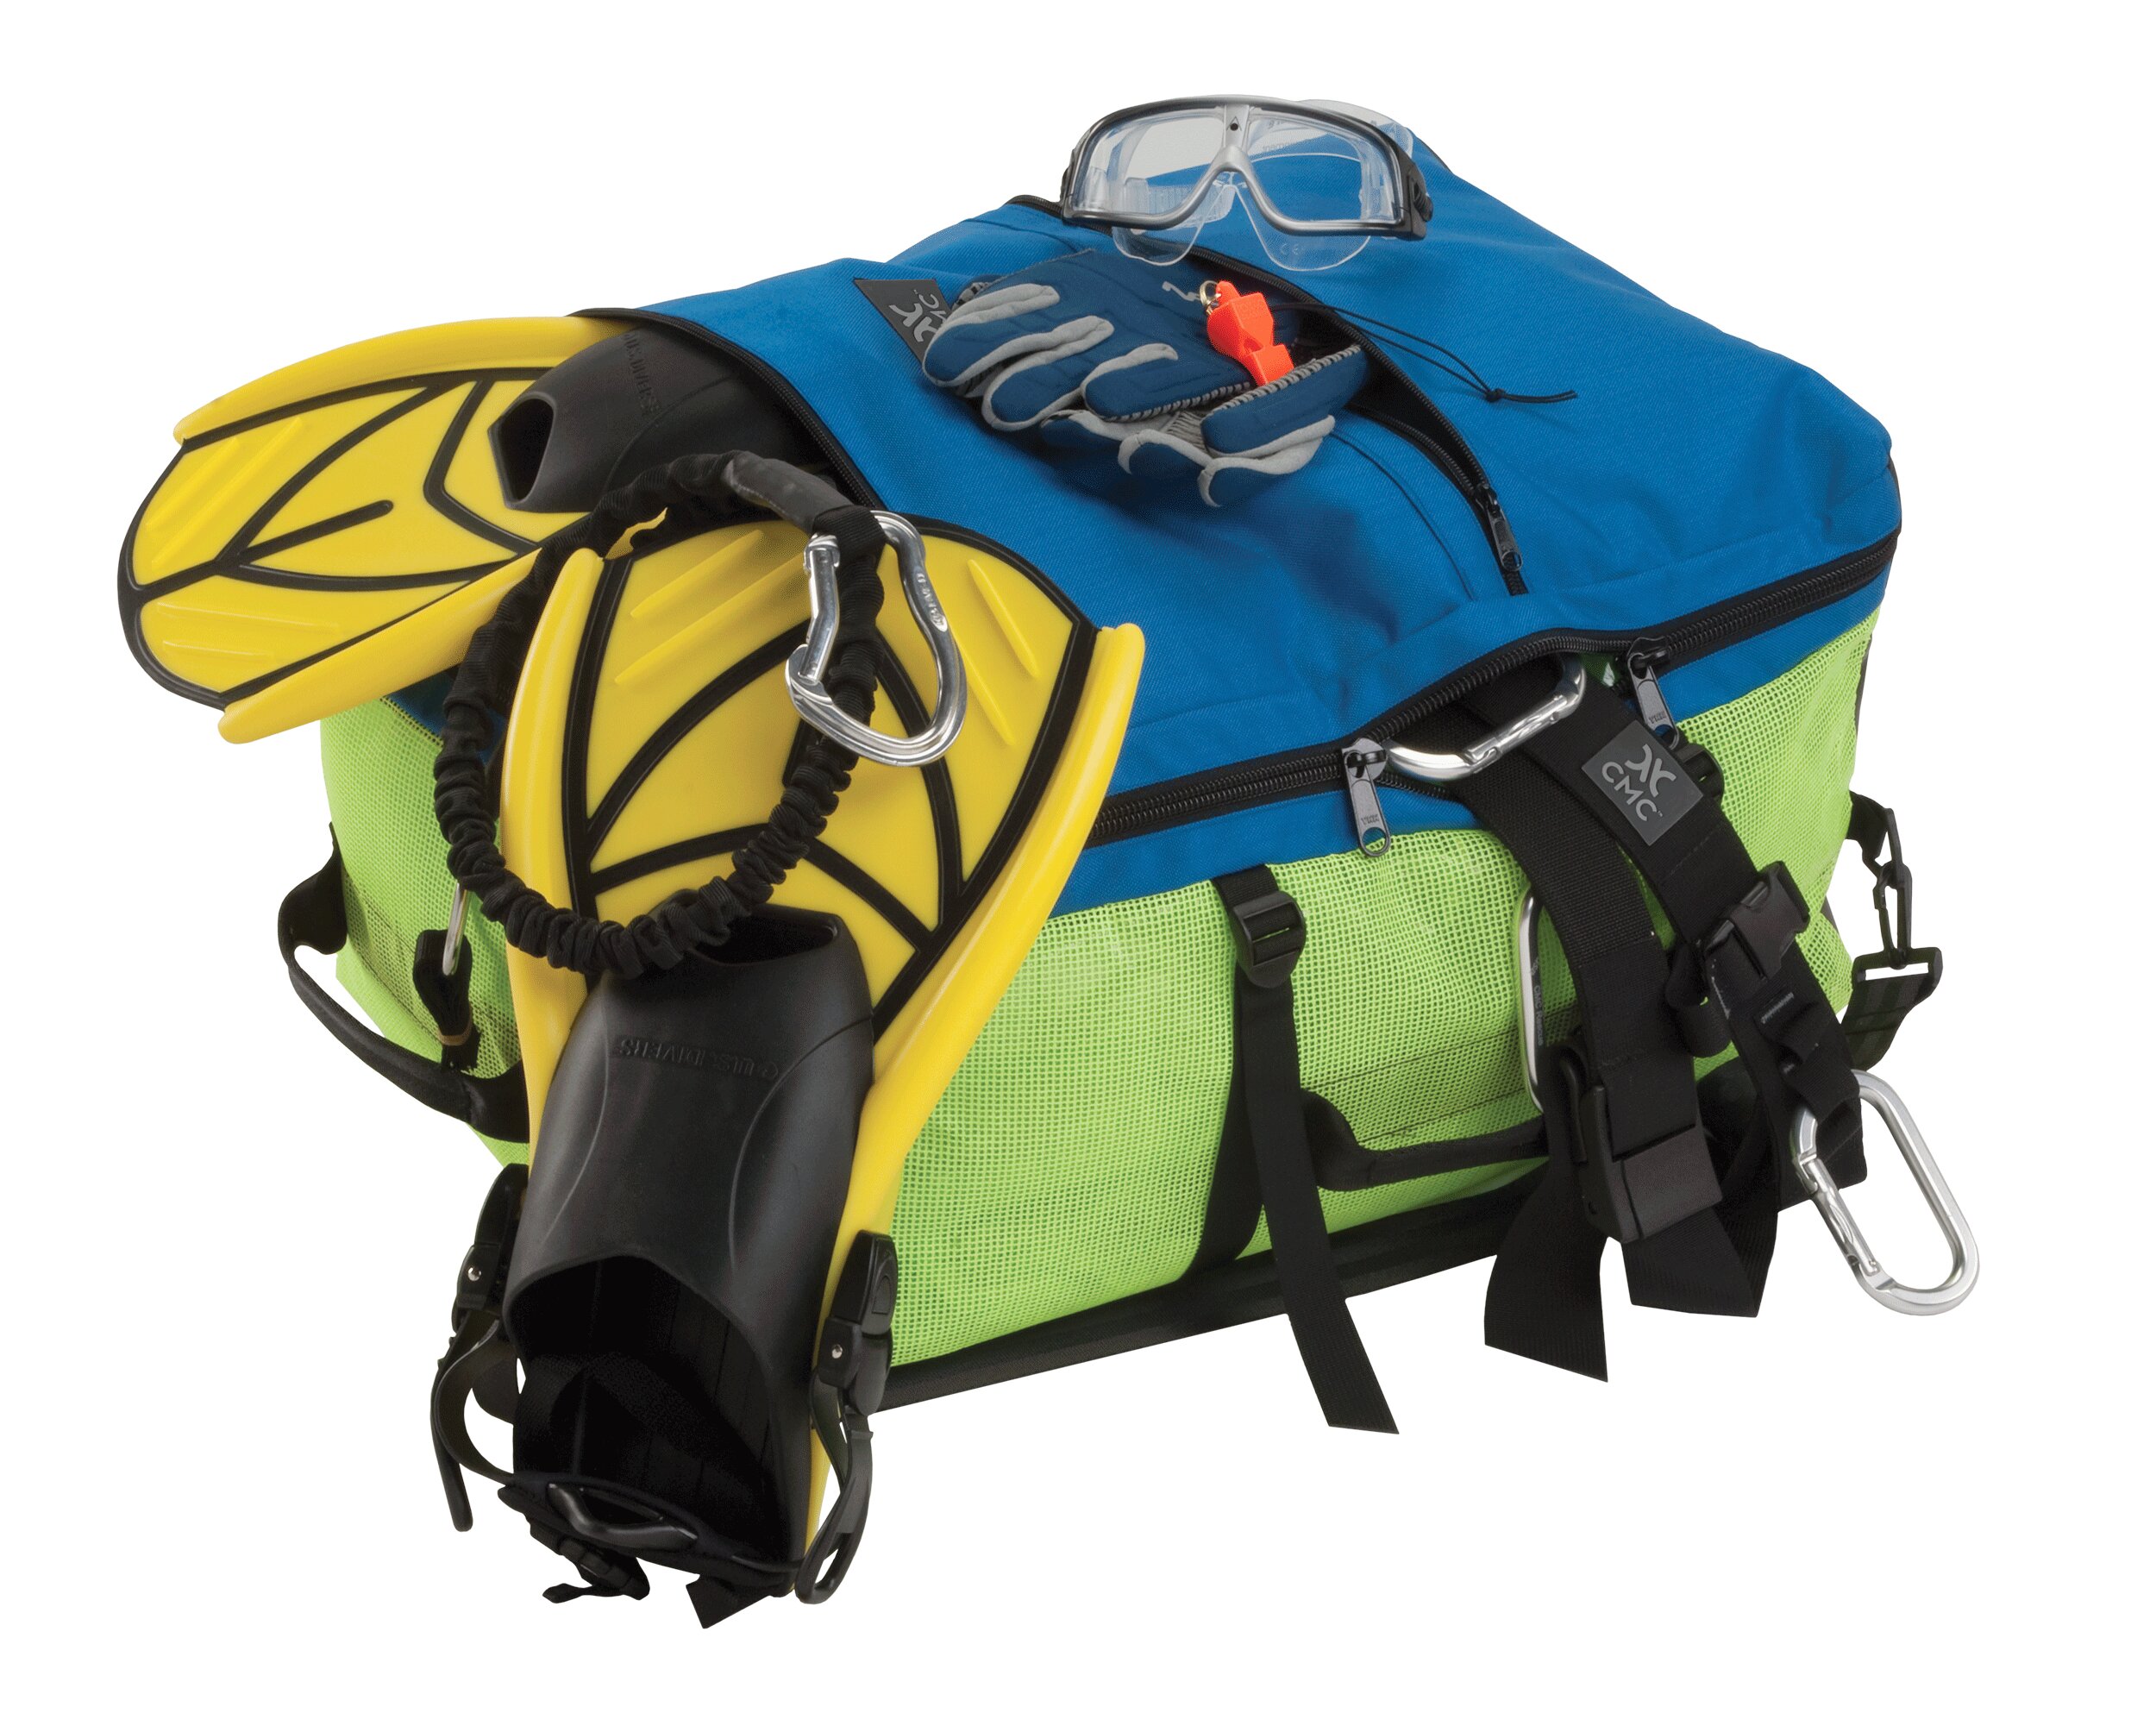 https://www.cmcpro.com/wp-content/uploads/wd/products/440752_Water_Rescue_Gear_Bag_02.jpg?ver=1640060424